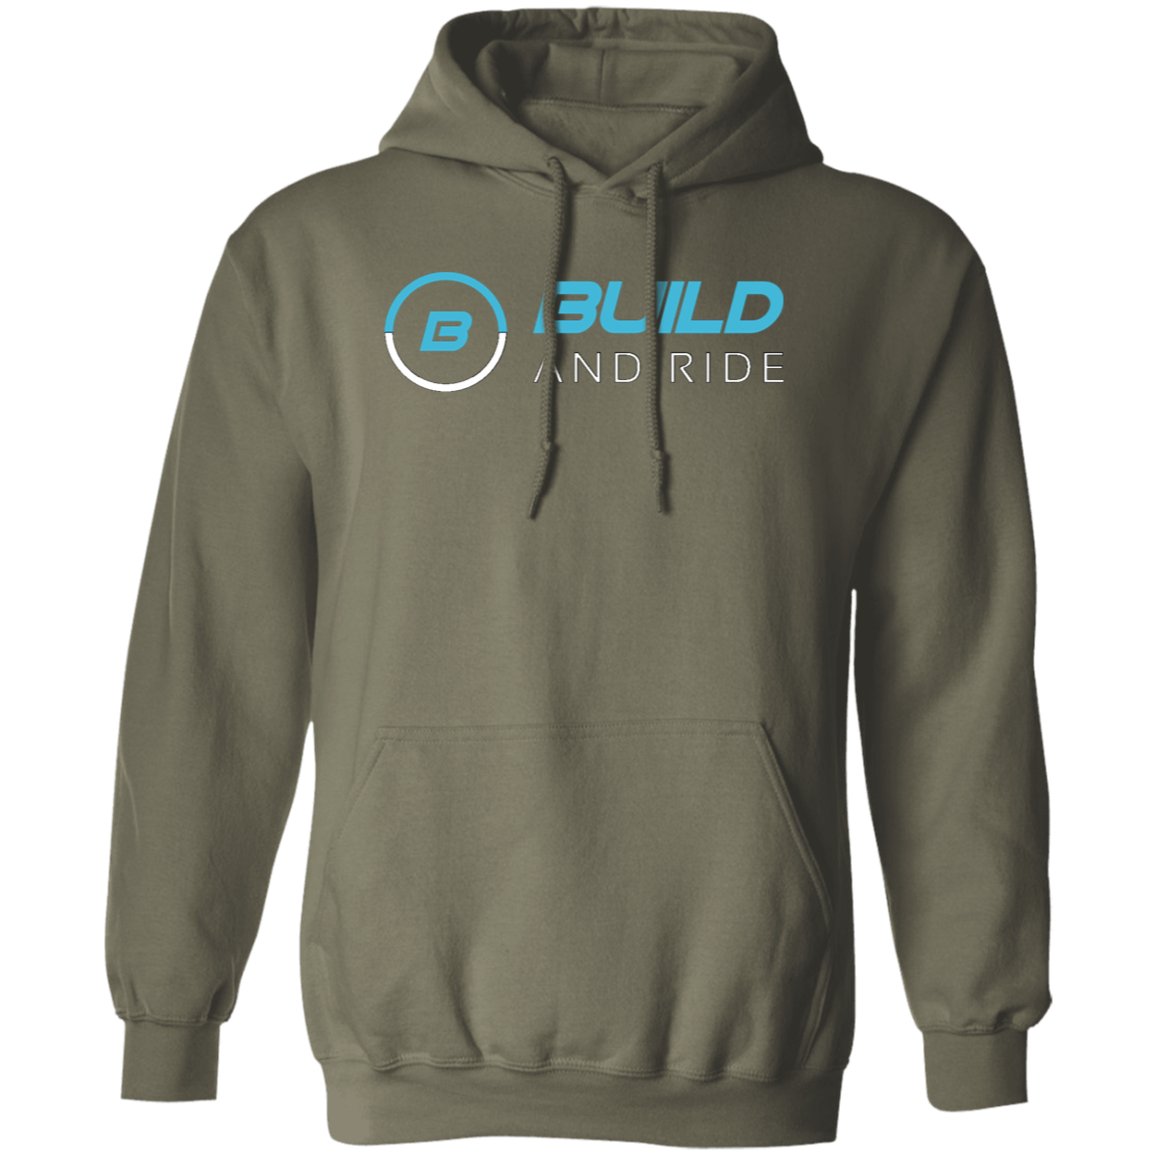 Build And Ride 2 Hoodie - Build And Ride